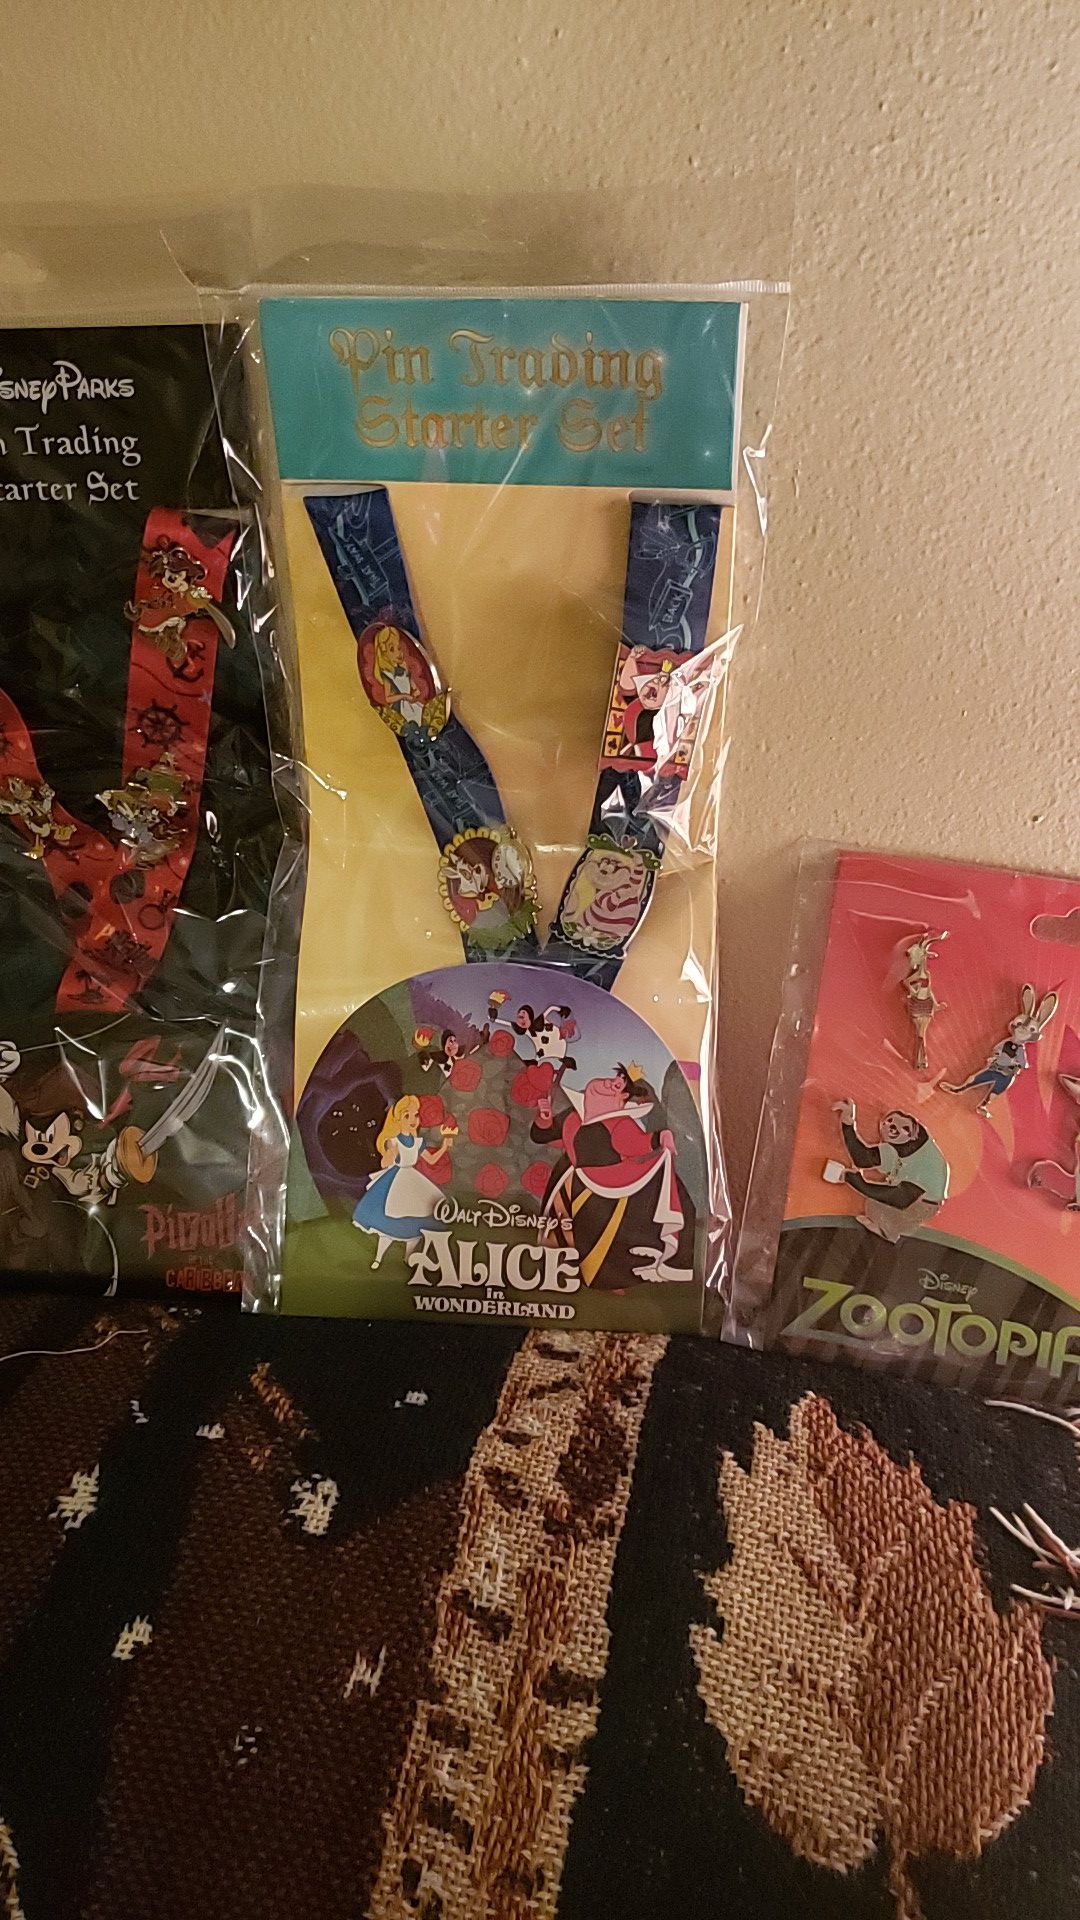 Disney Starter pack. Pin tradeing pins. New. $15 each. Retail price 29.95. Pick up in Merritt Island. Cocoa Florida area.